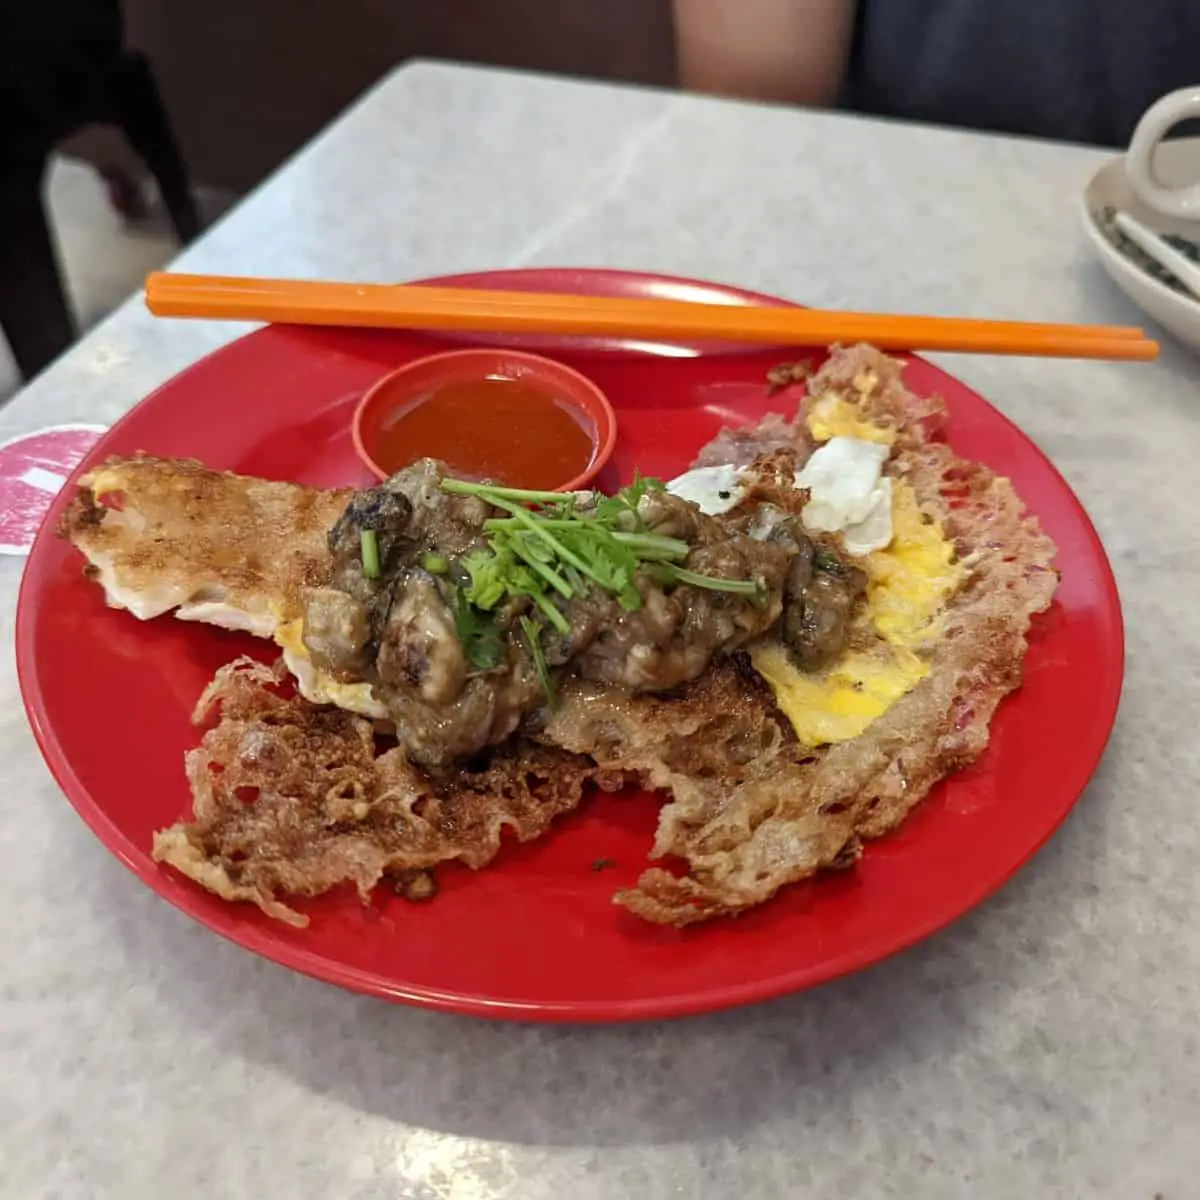 Oyster omelette at OO White Coffee